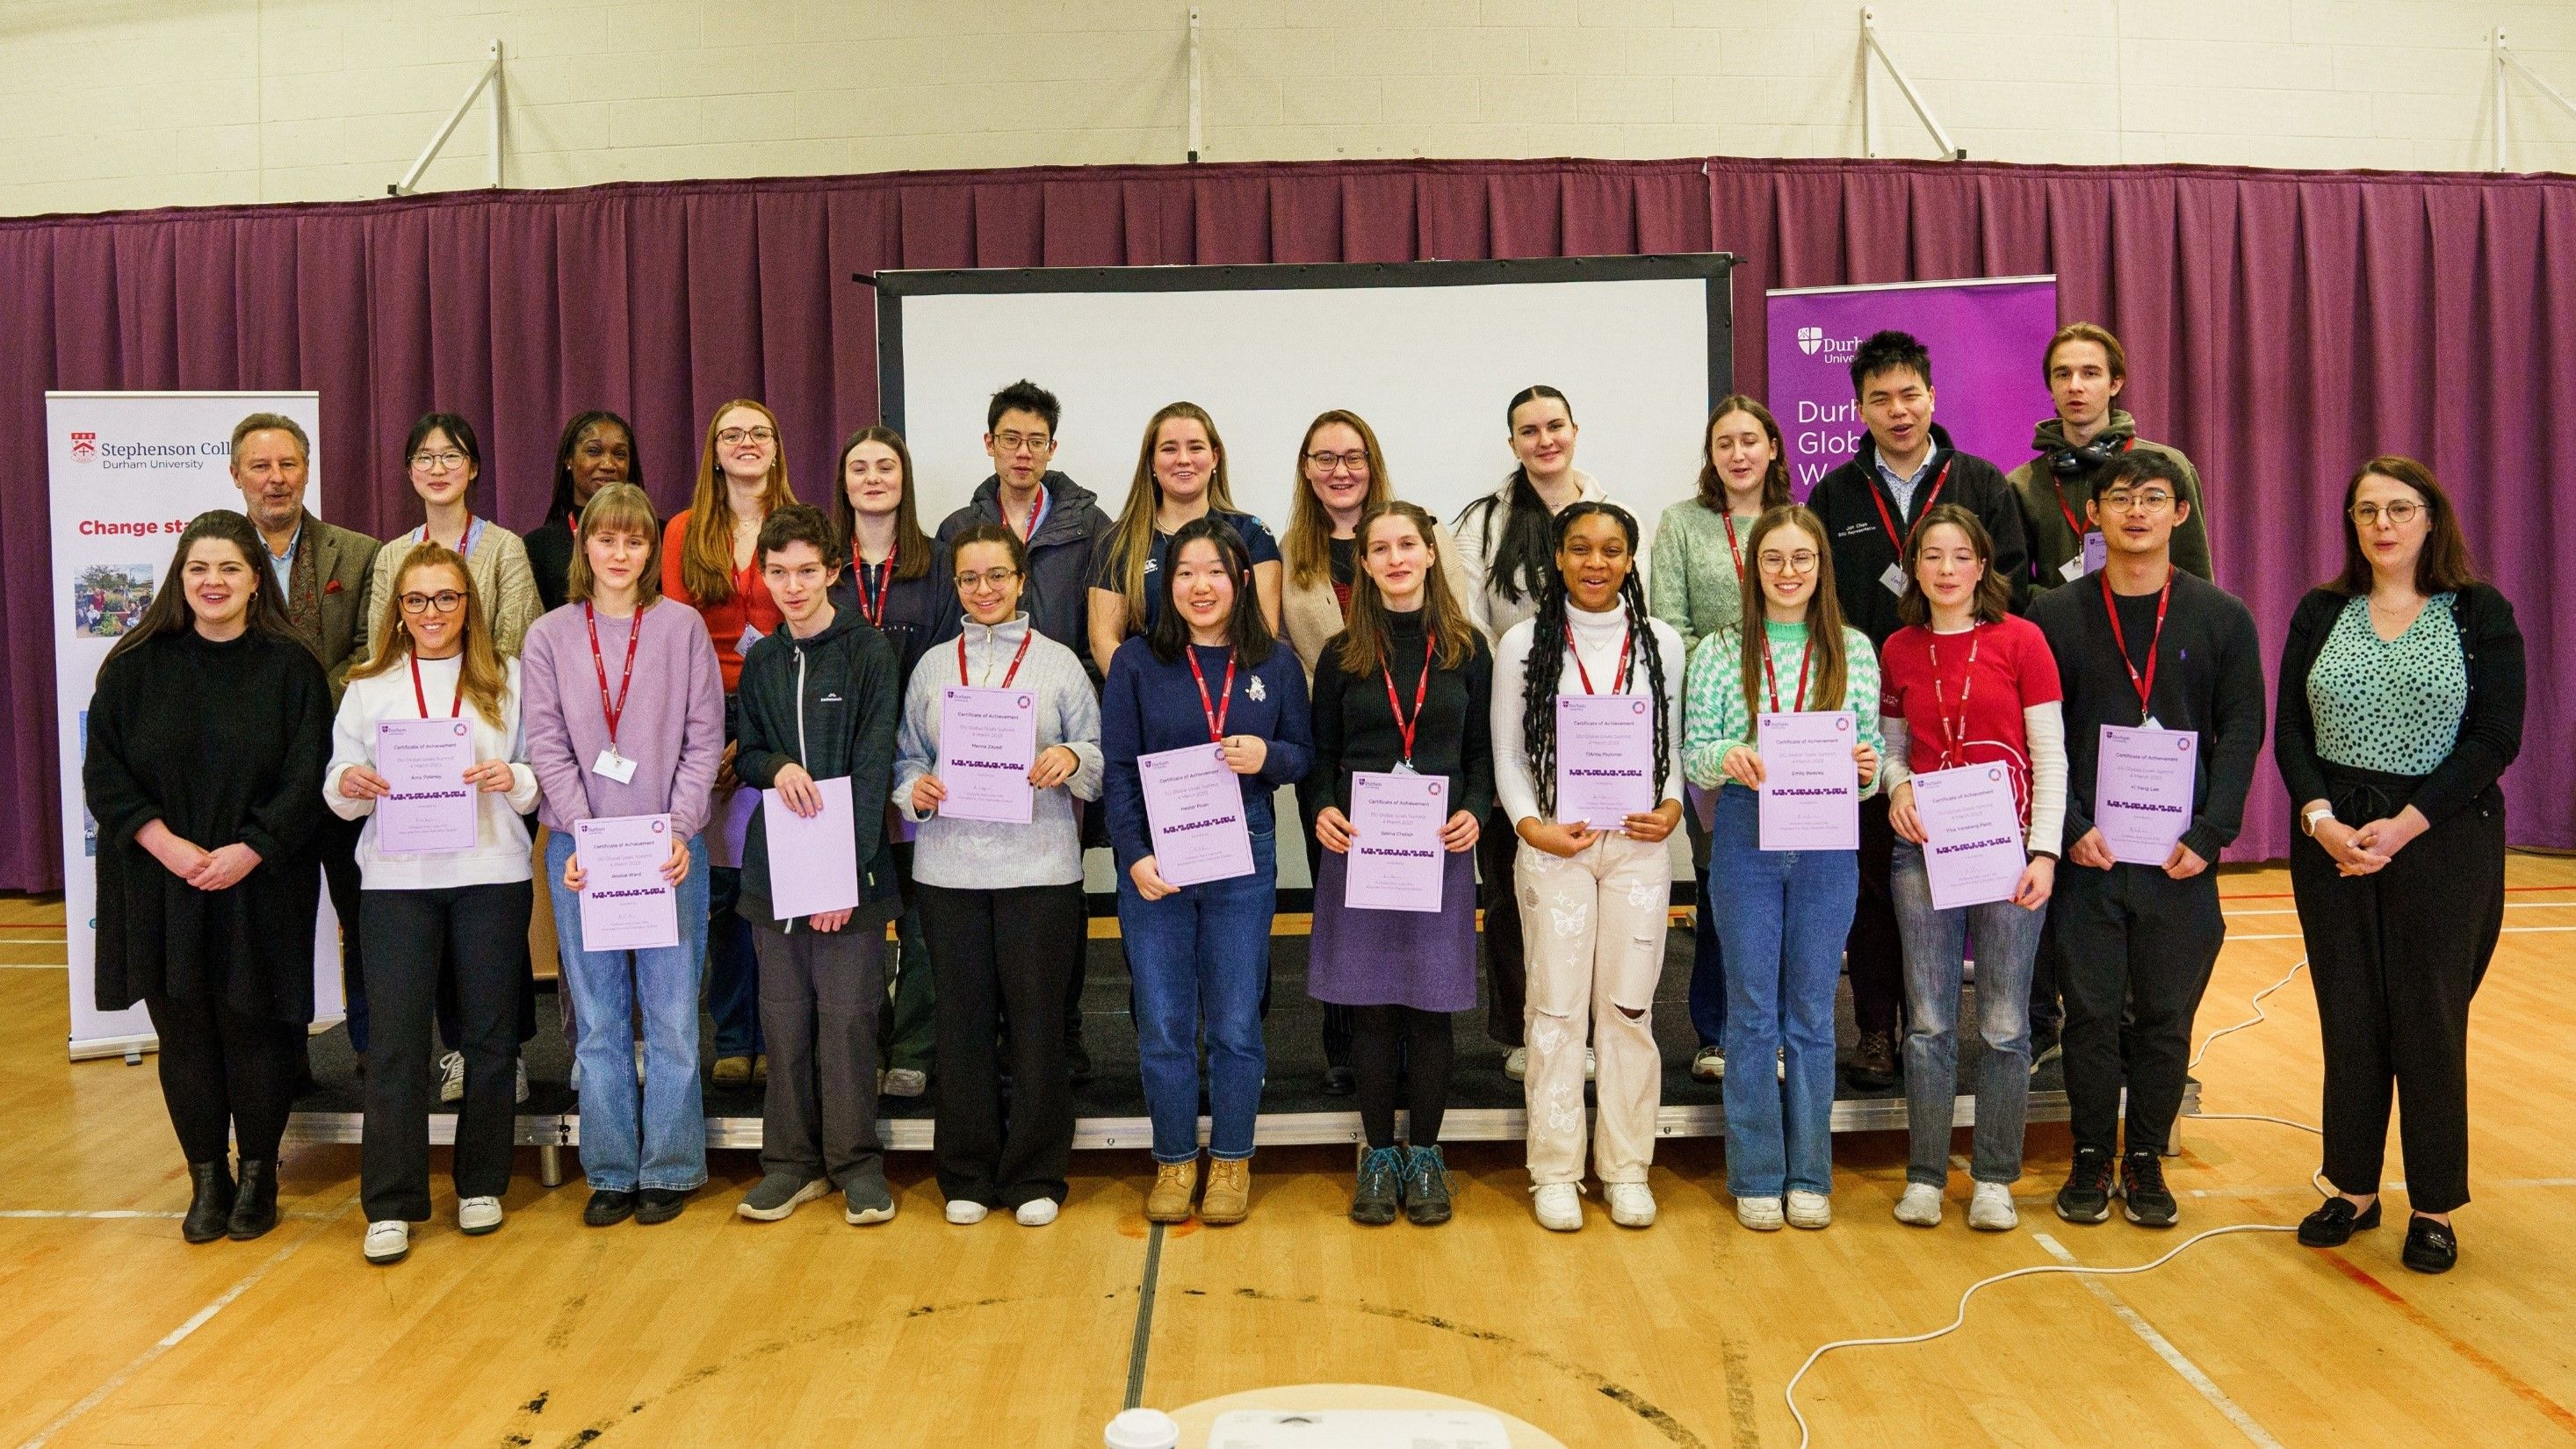 Students hold their certificates of achievement after completing the Global Goals Summit